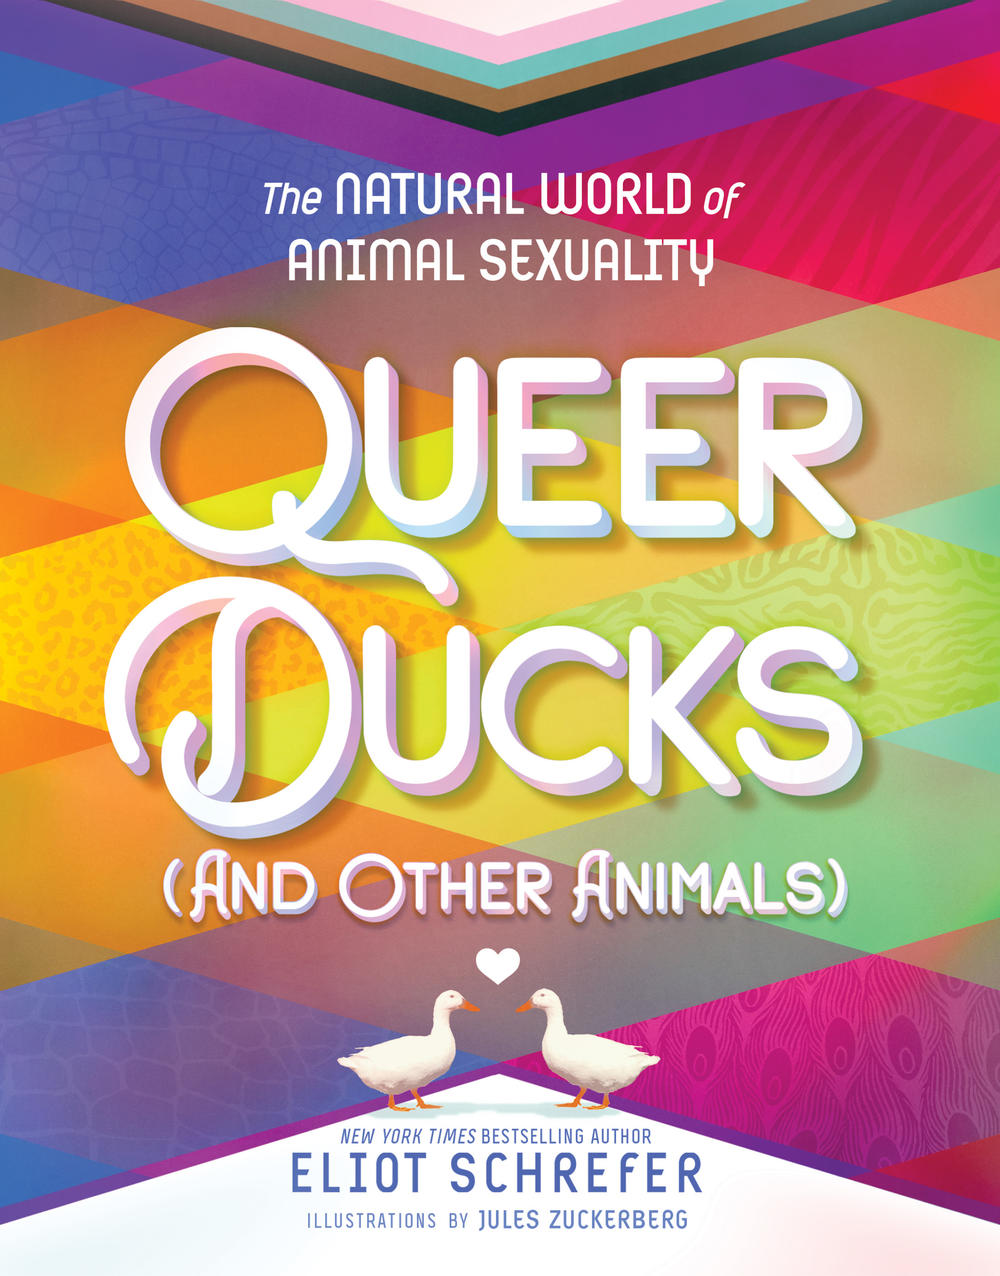 Eliot Schrefer's new book <em>Queer Ducks (and Other Animals): The Natural World of Animal Sexuality.</em>